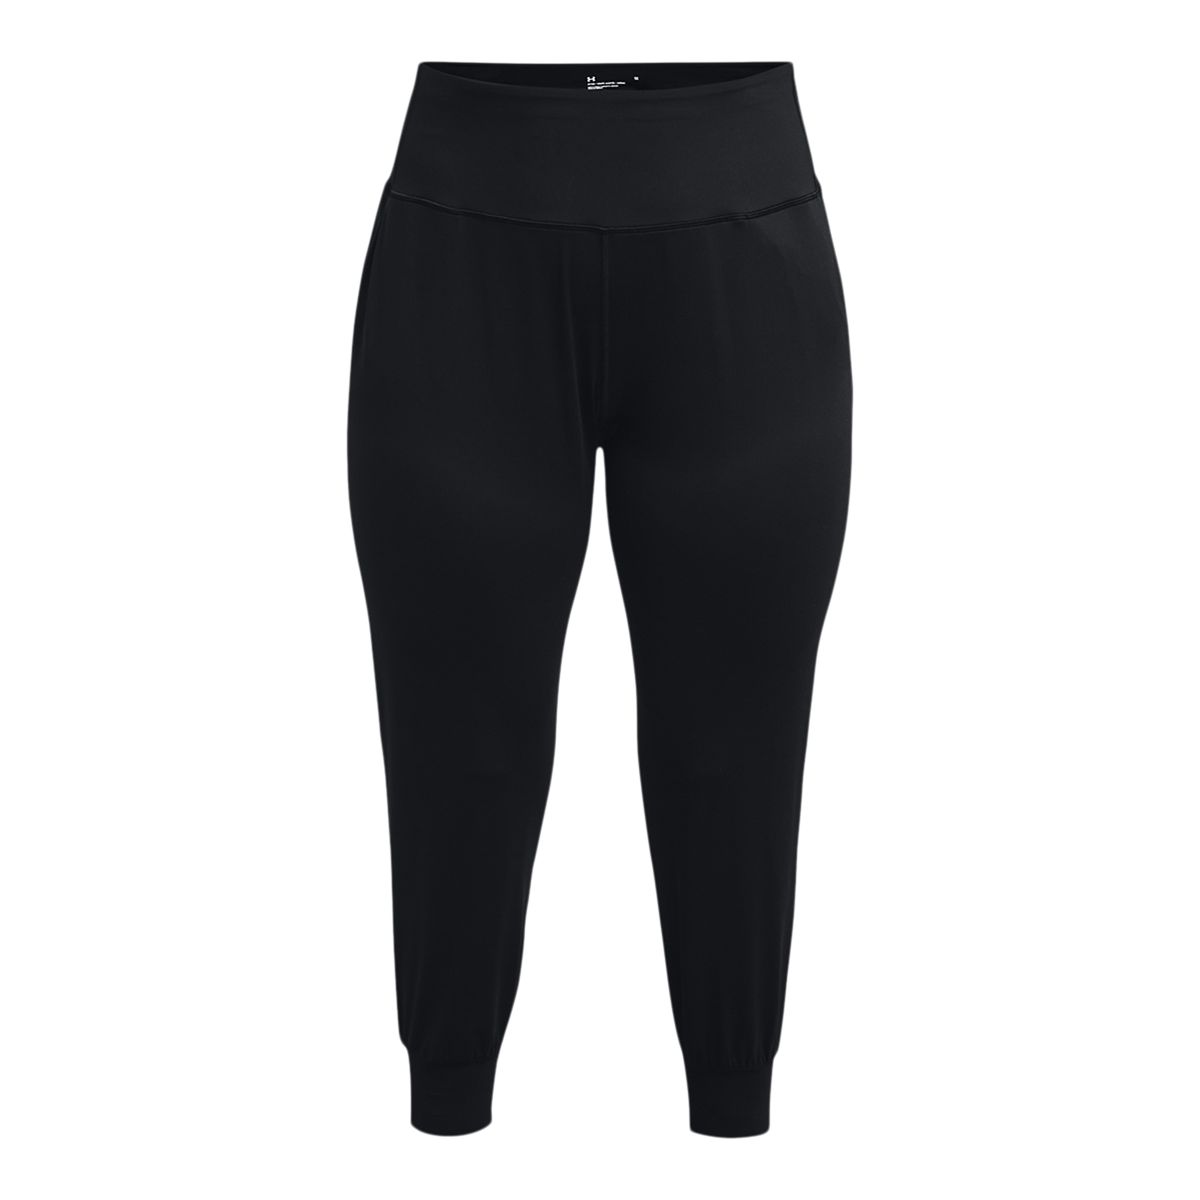 https://media-www.sportchek.ca/product/div-03-softgoods/dpt-70-athletic-clothing/sdpt-02-womens/333820852/ua-w-plus-meridian-jogger-0187d05f-196a-4ea8-be36-25ff072ac414-jpgrendition.jpg?imdensity=1&imwidth=1244&impolicy=mZoom